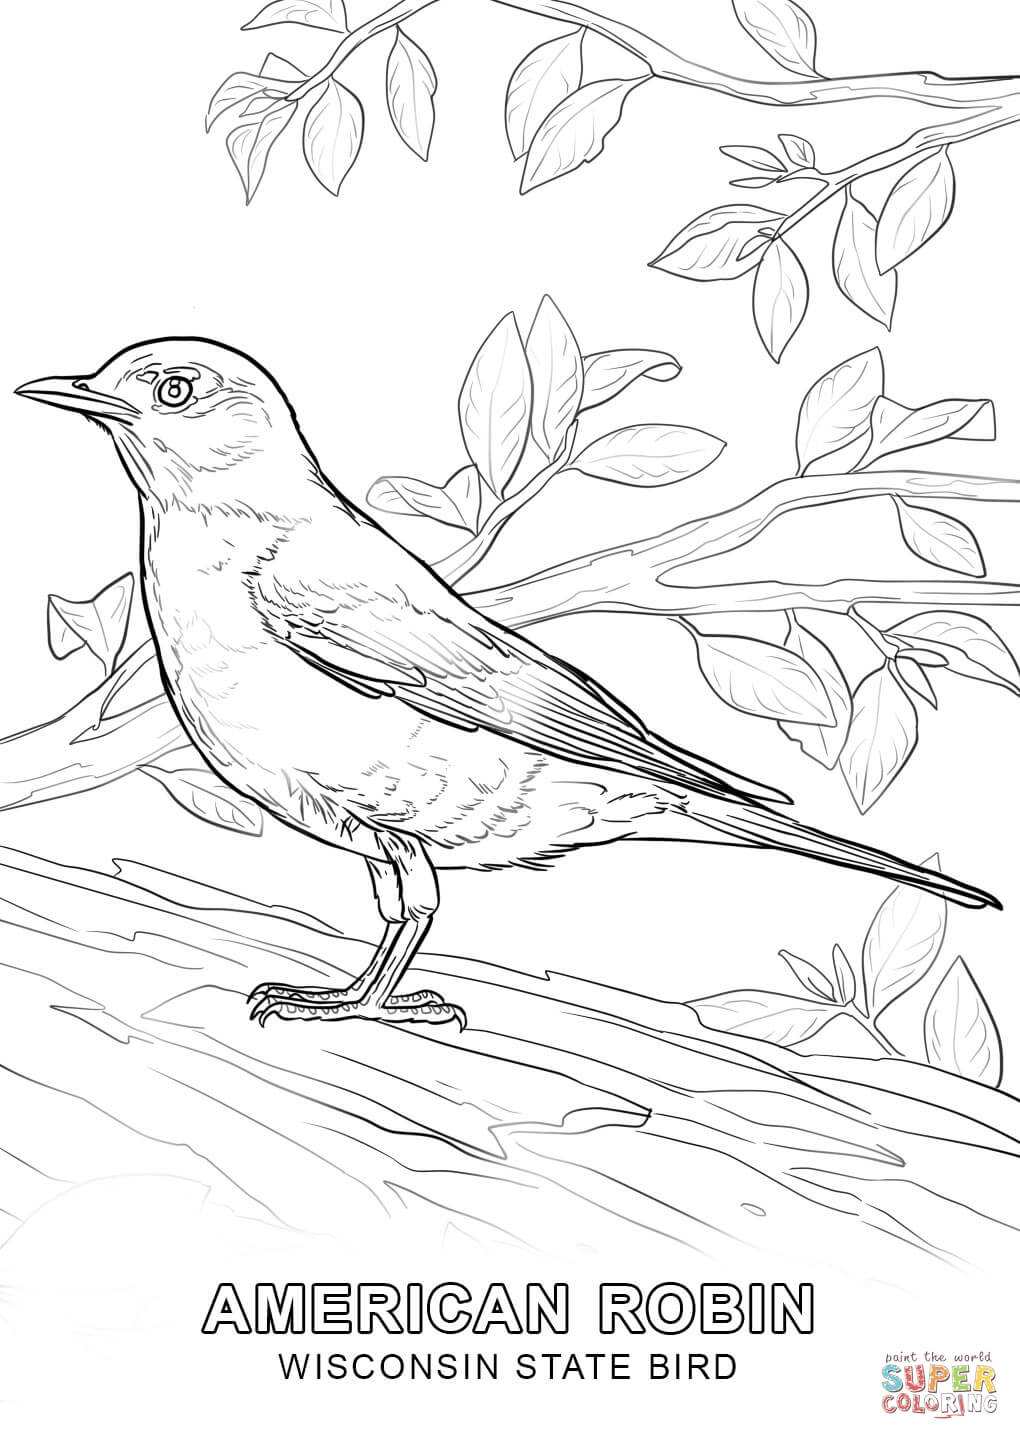 Coloring Pages : Reliable Printable Pictures Of Birds To Color - Free Printable Images Of Birds